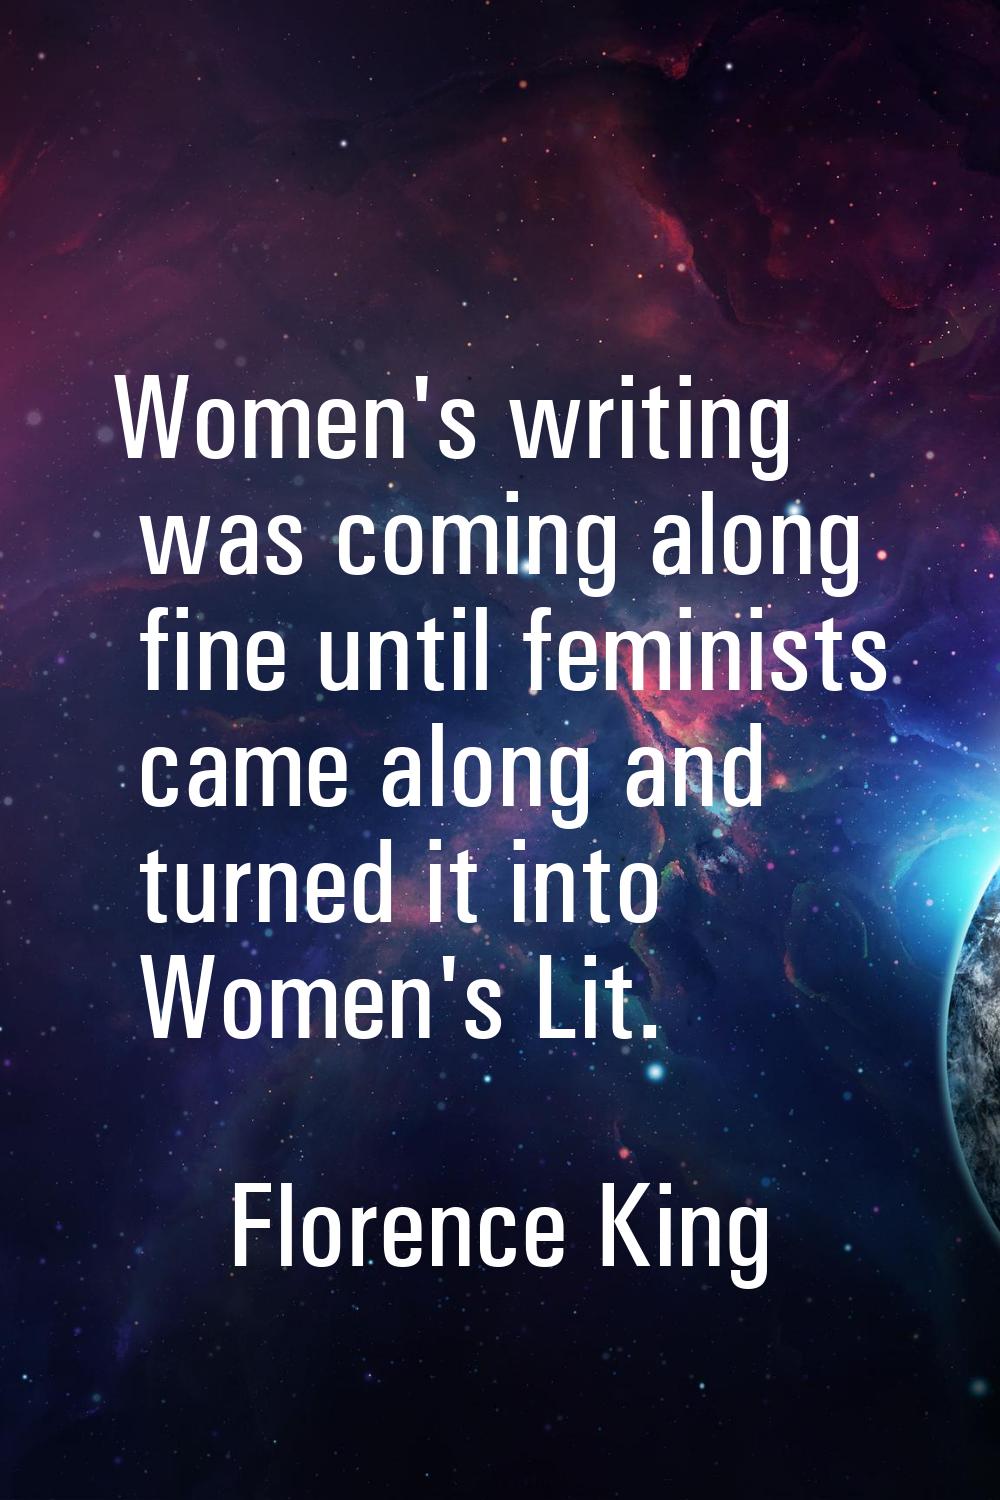 Women's writing was coming along fine until feminists came along and turned it into Women's Lit.